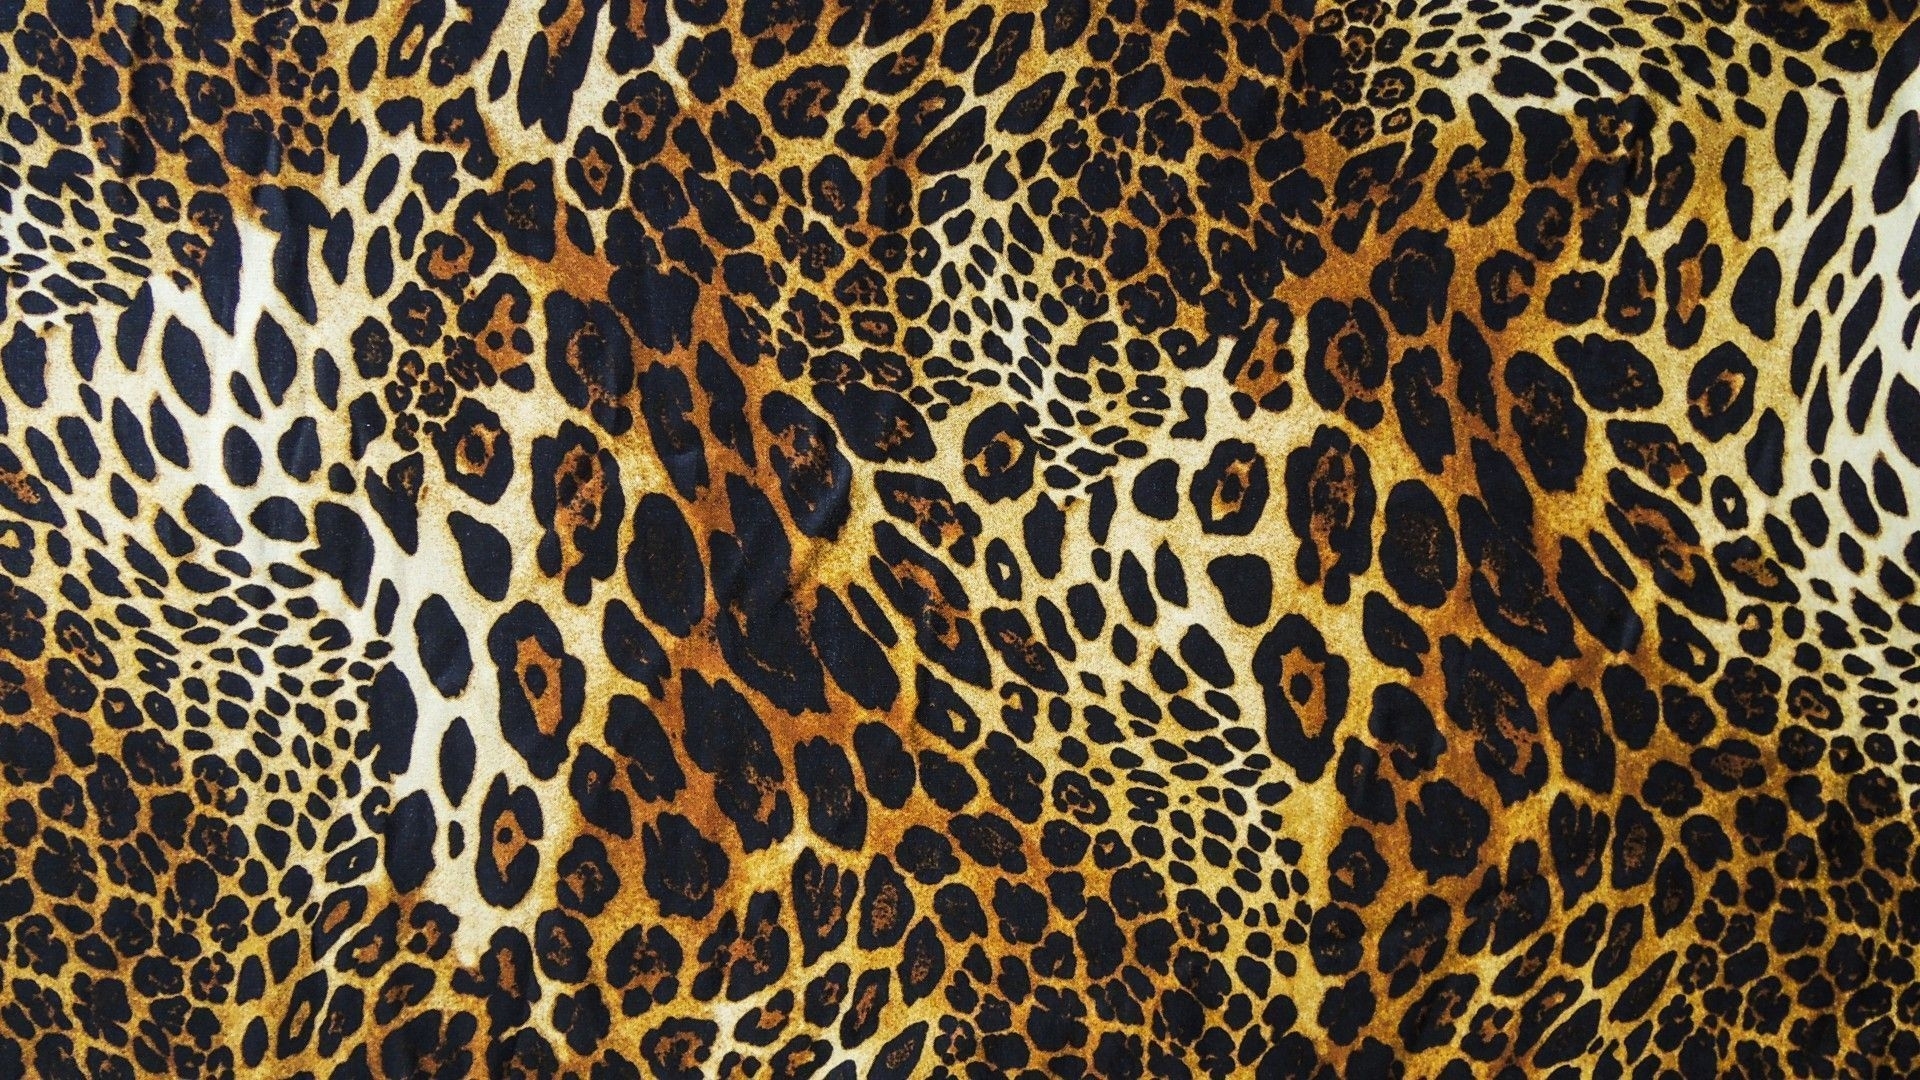 10 New Leopard Print Wallpaper Hd FULL HD 1080p For PC Background 2021